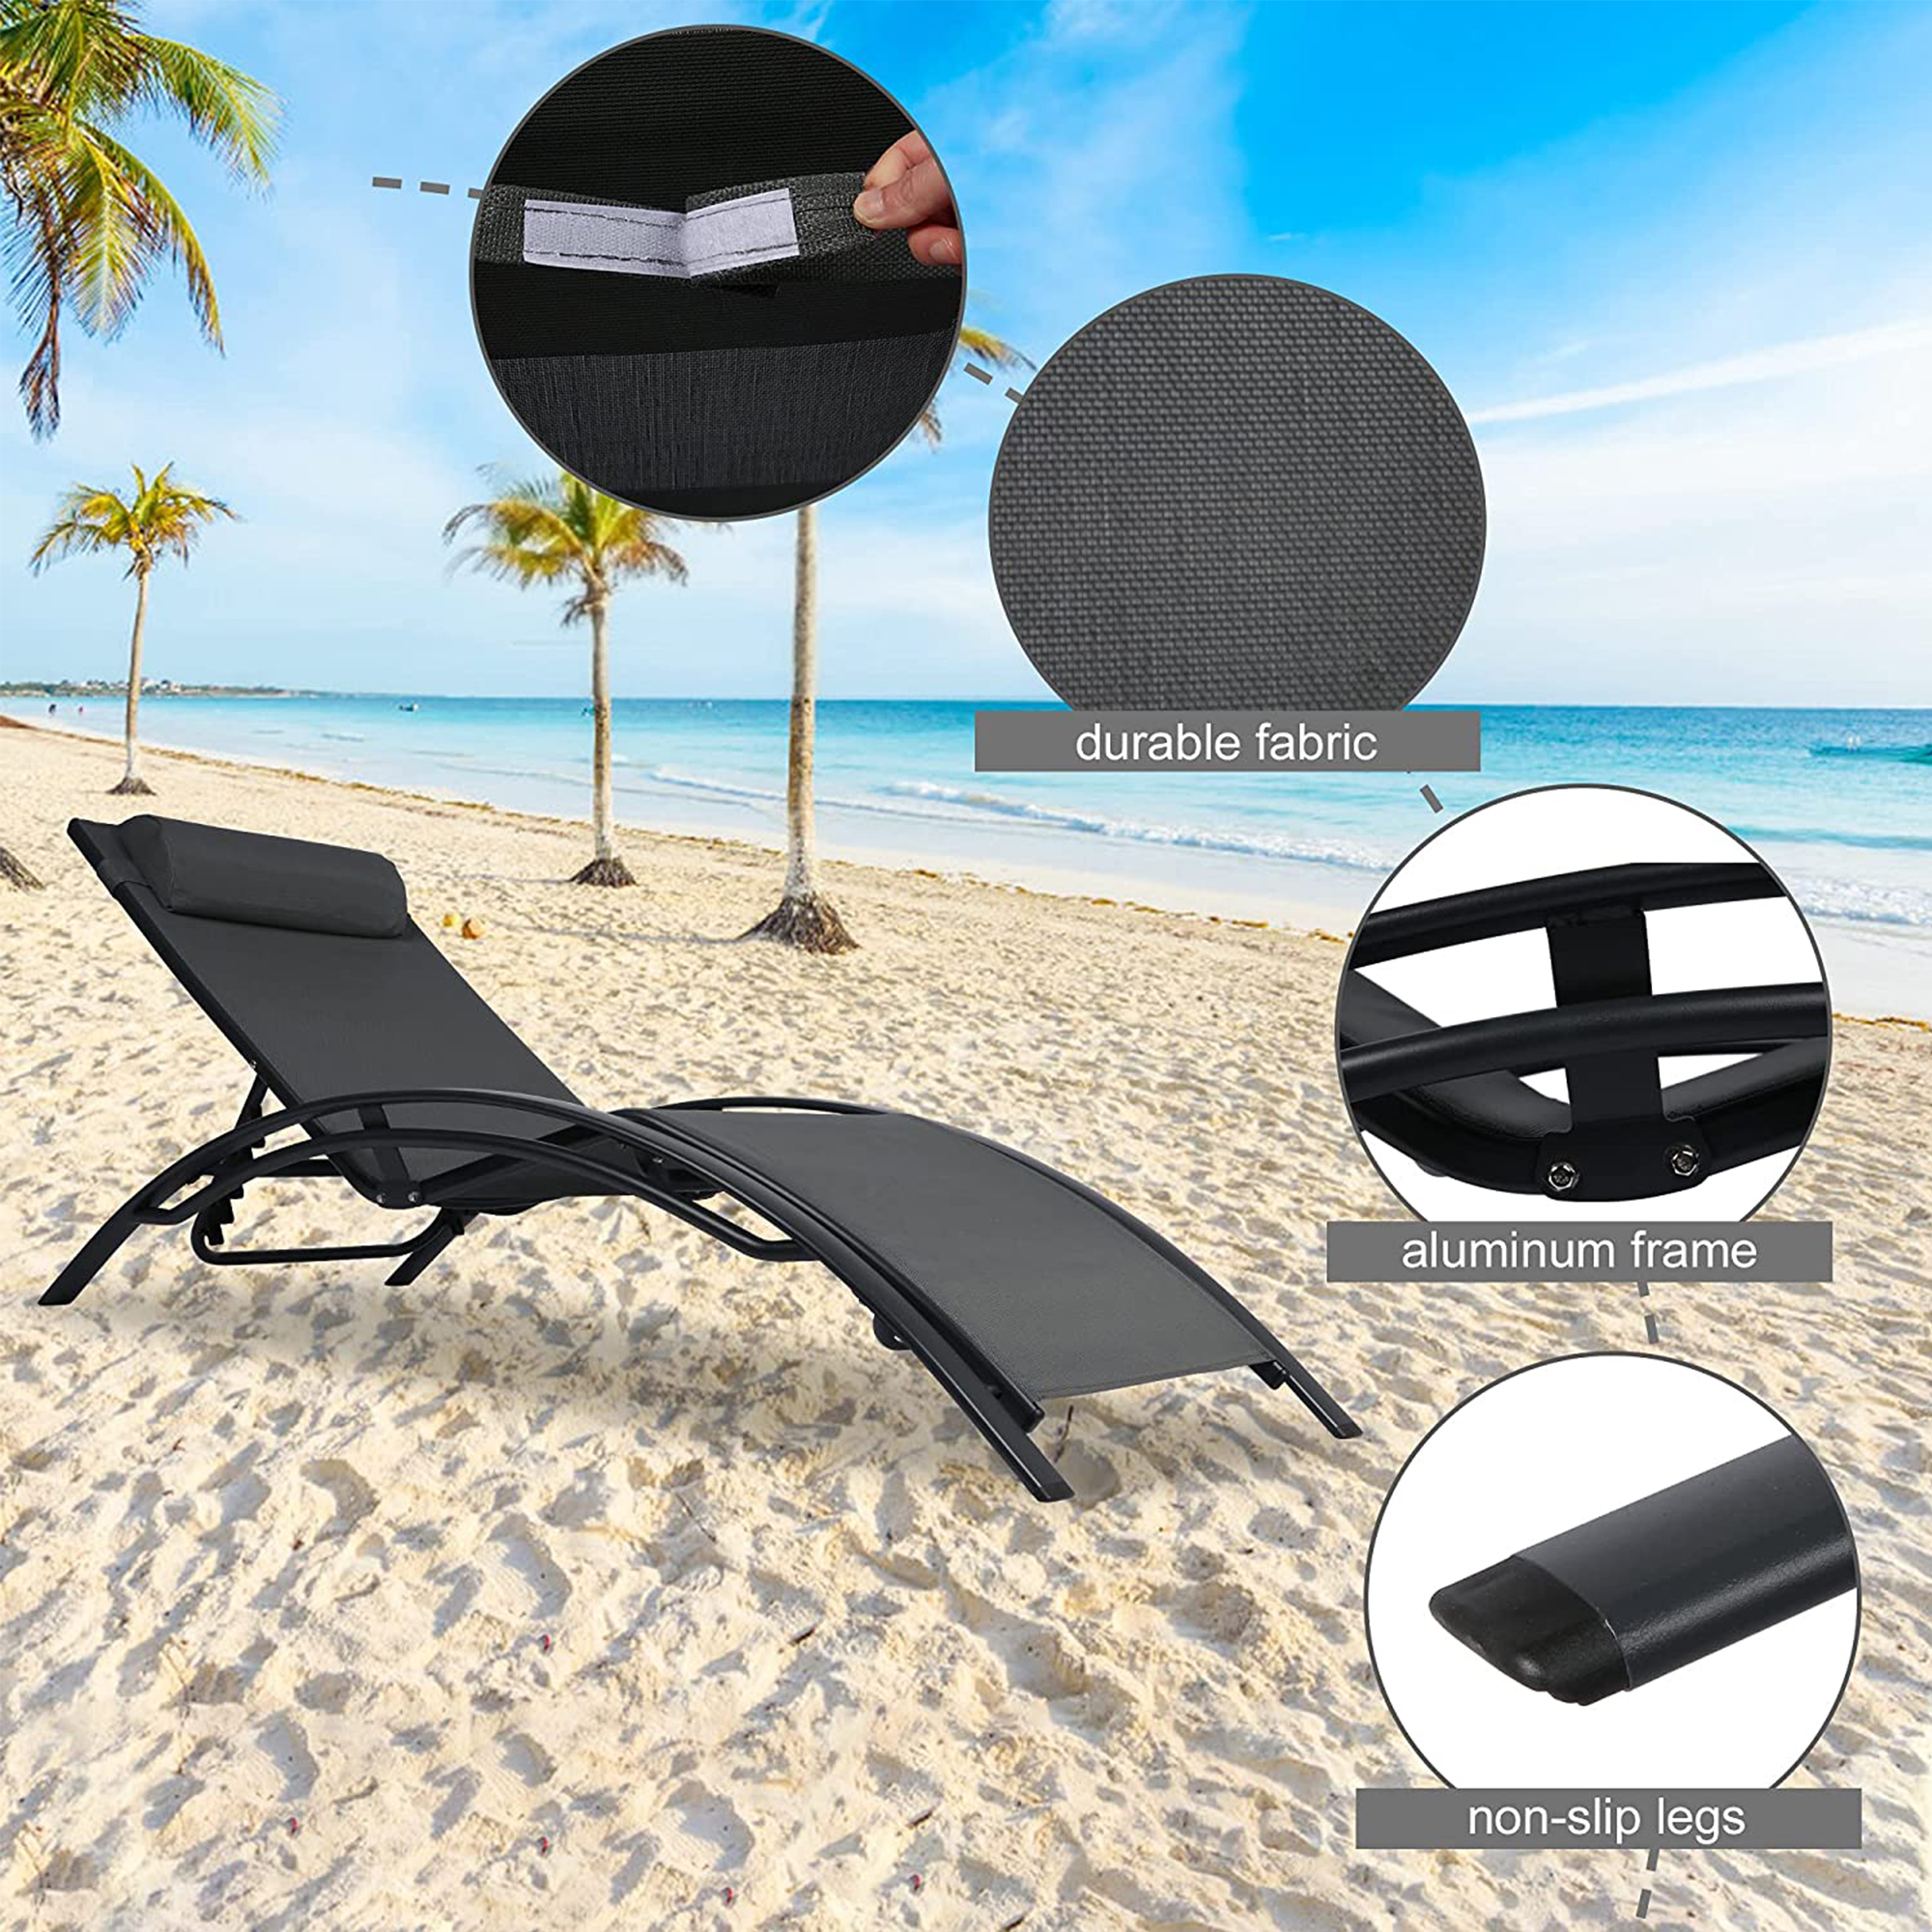 KARMAS PRODUCT Chaise Lounge Aluminum Chair Set of 2 w/Tea Table, Patio Lounge Chair Reclining 4 Adjustable Back Position w/Removable Cushions for Outdoor Beach Pool Backyard Garden Lawn,Gray - image 3 of 7